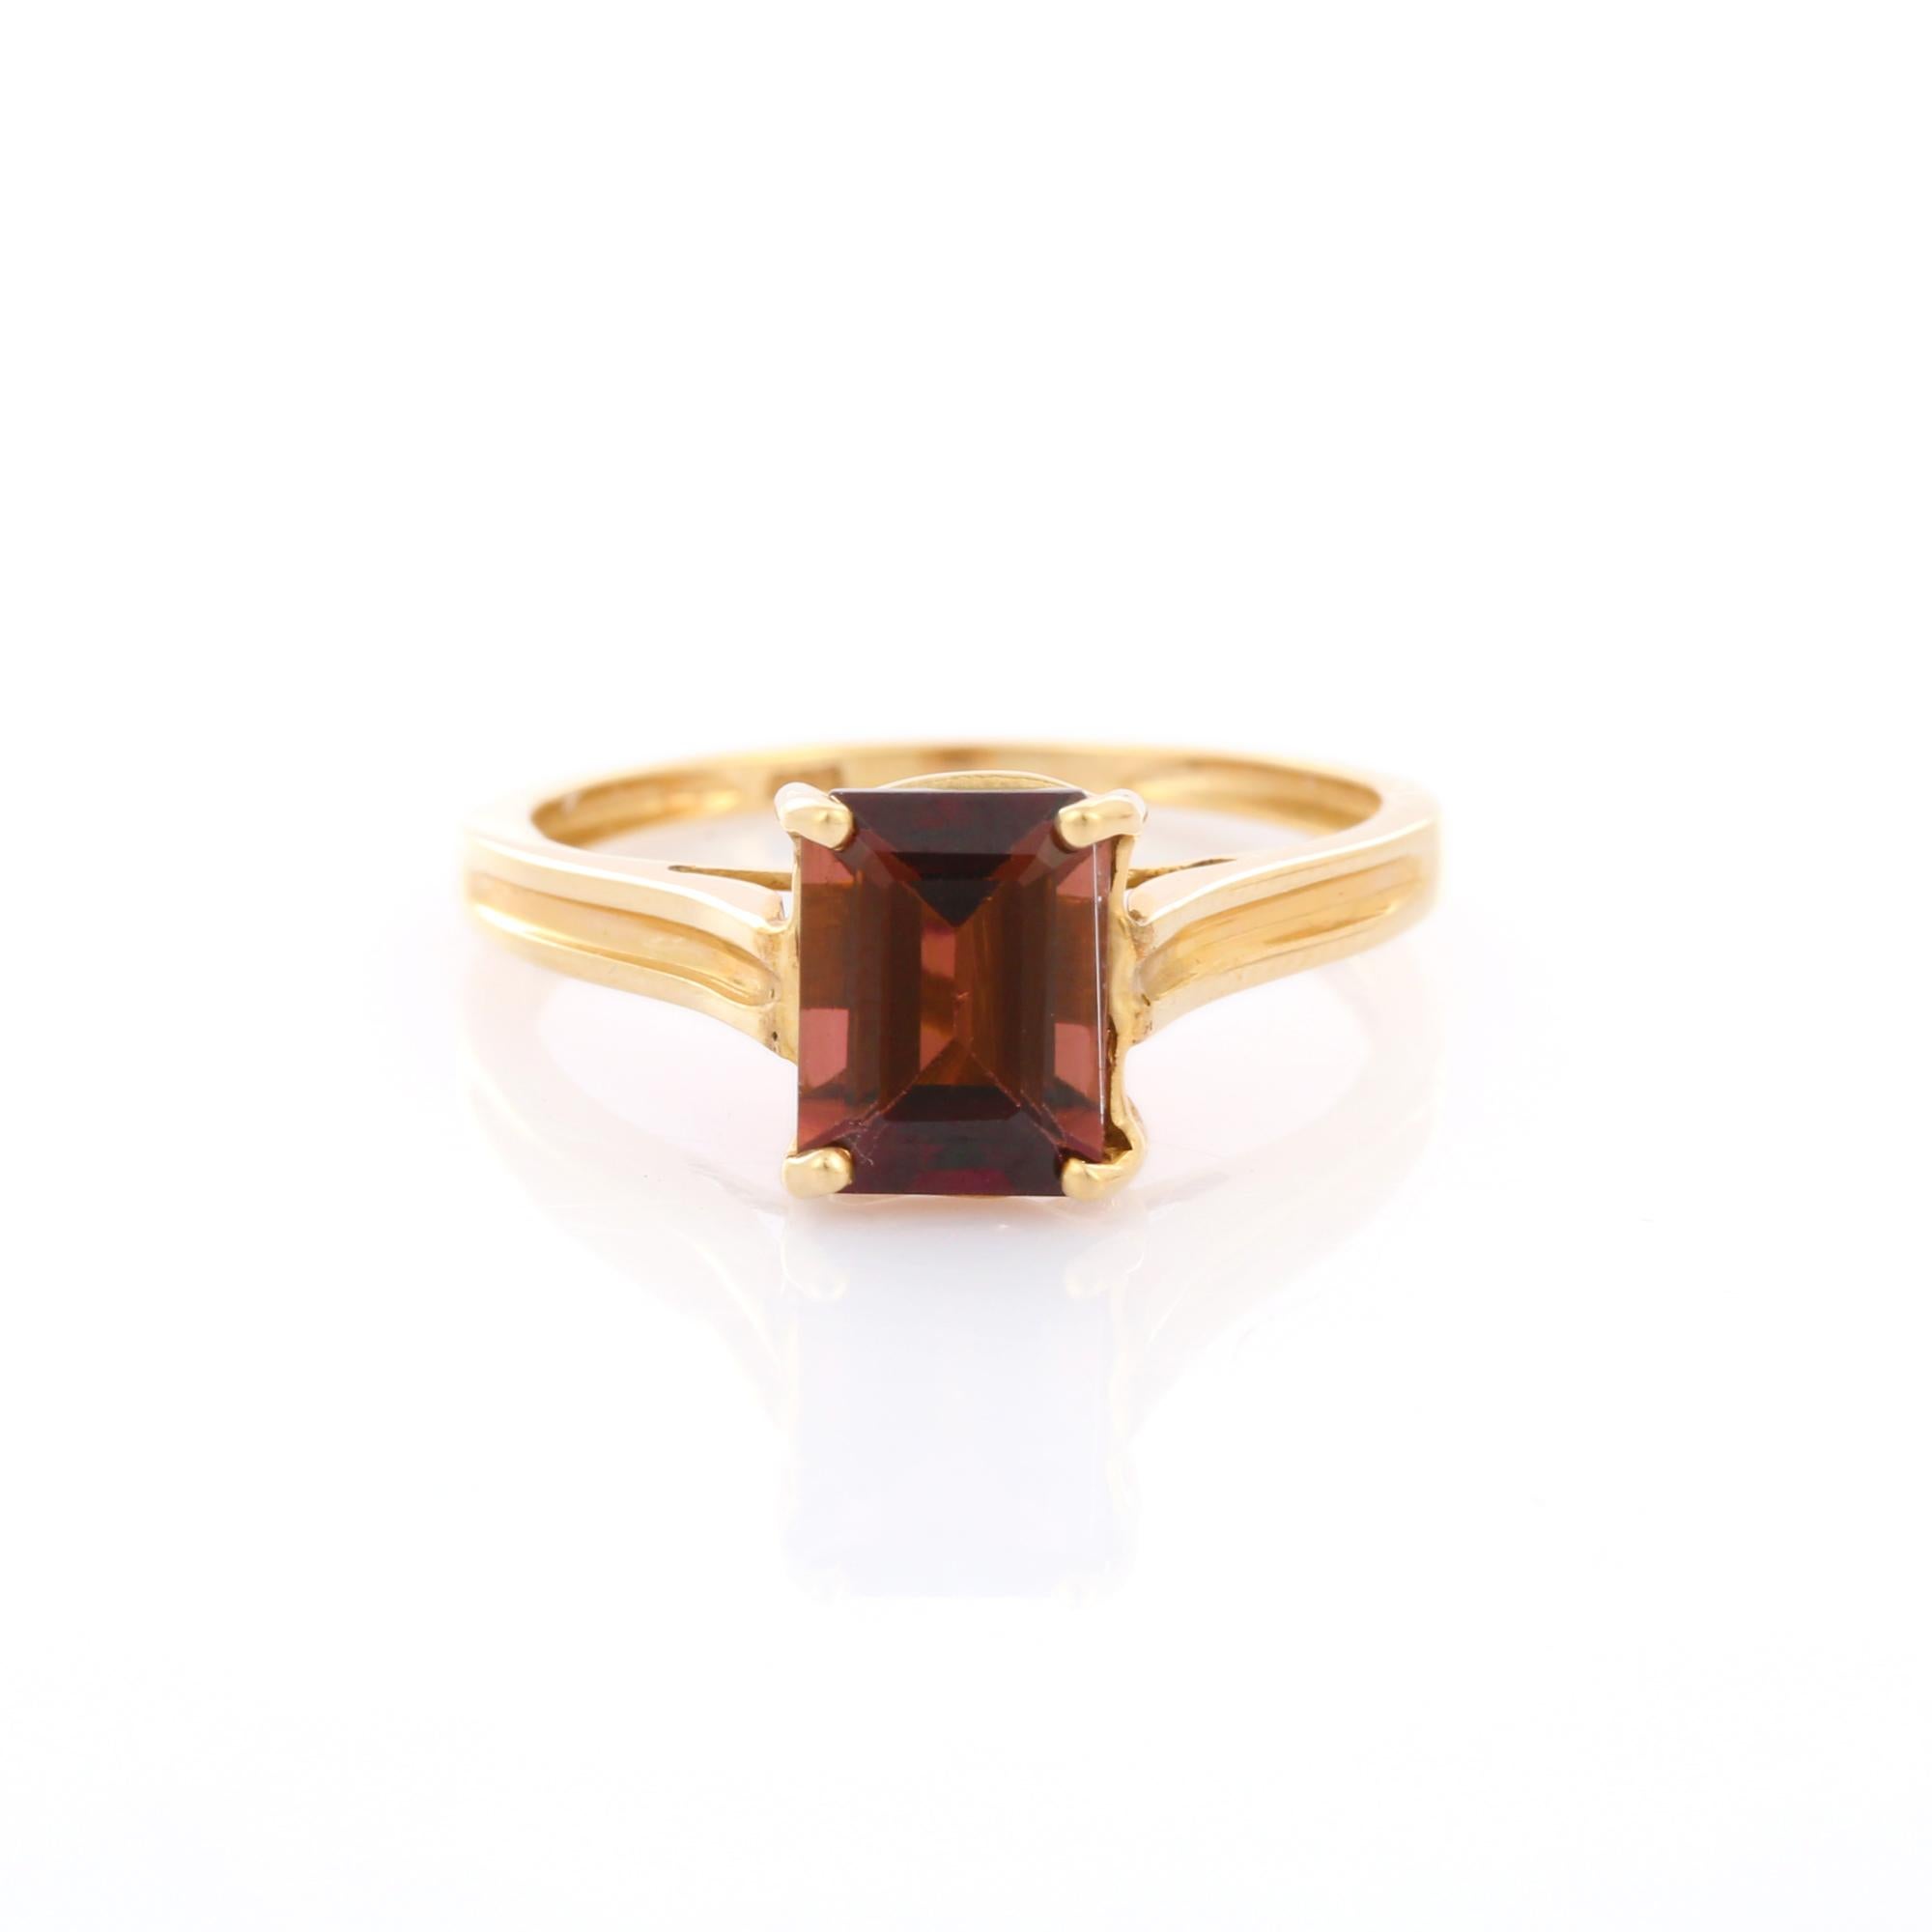 Octagon Cut Tourmaline Solitaire Ring in 14K Yellow Gold